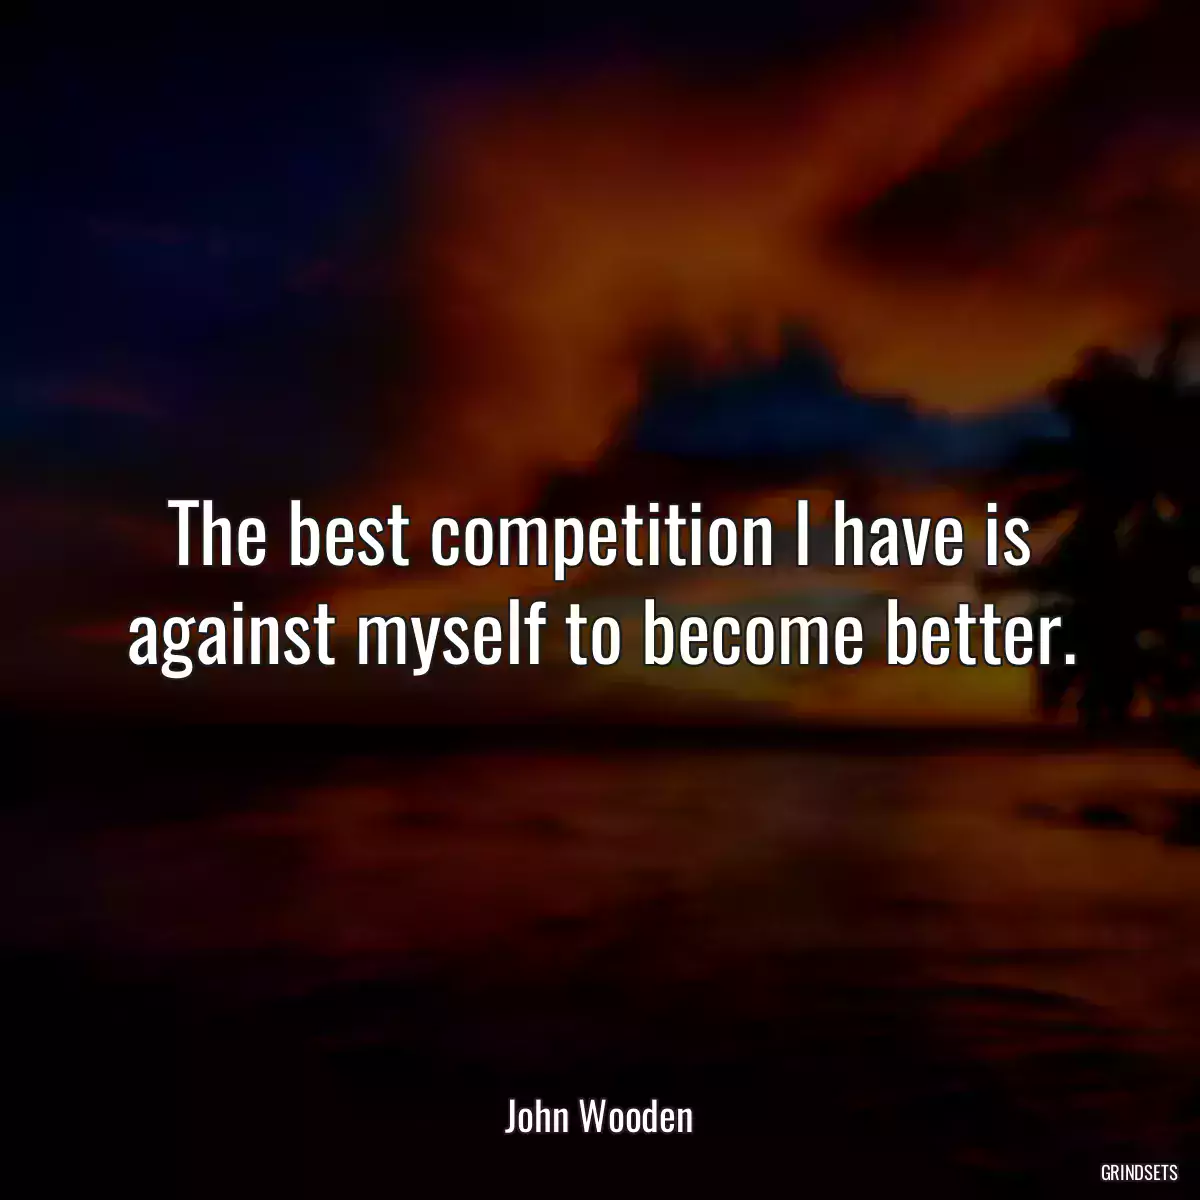 The best competition I have is against myself to become better.